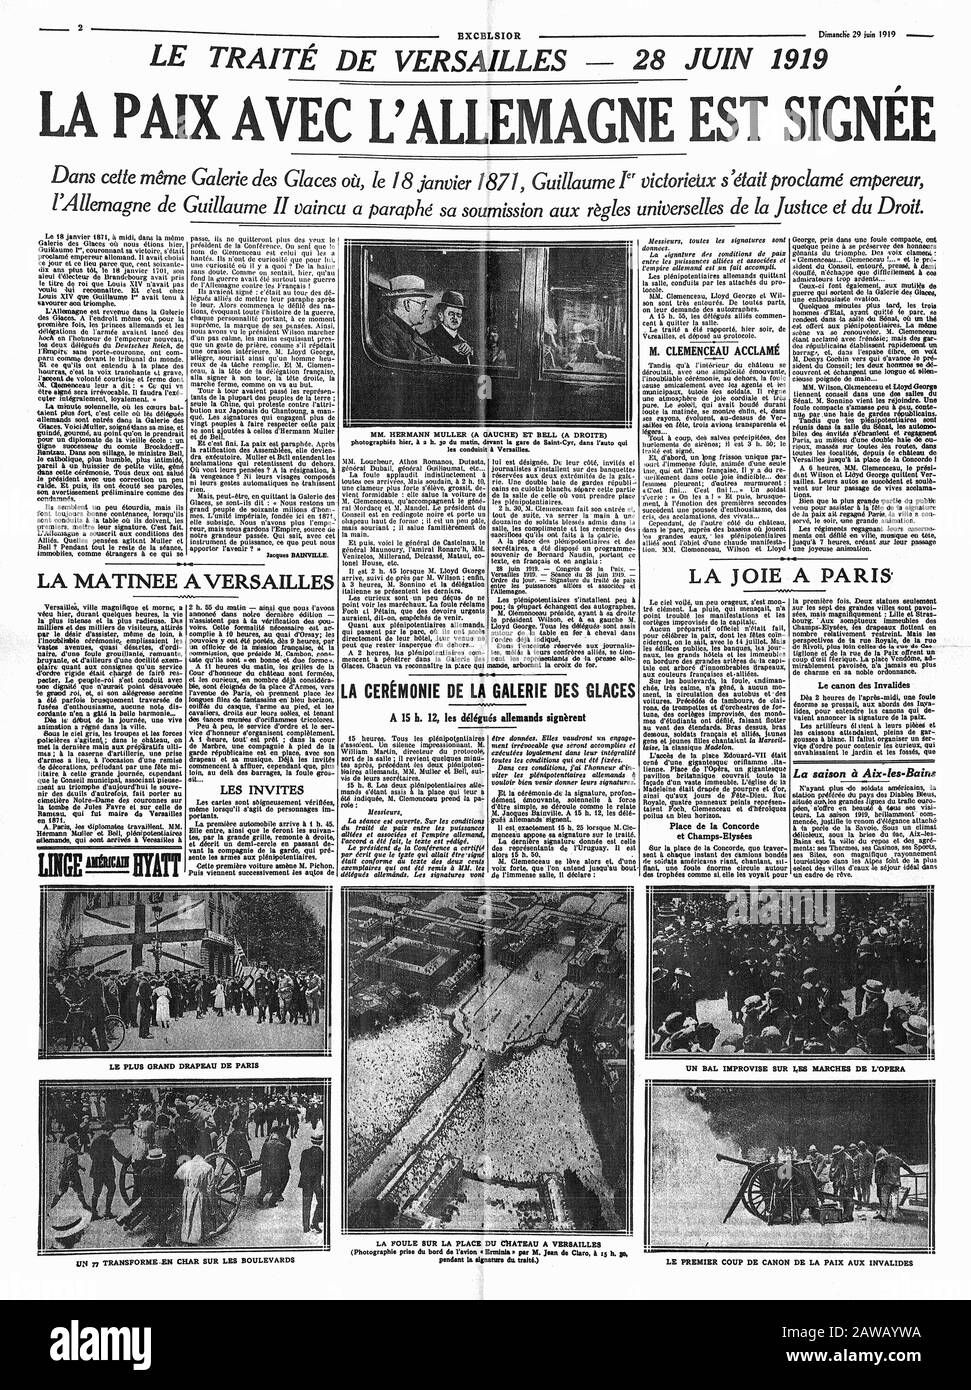 1919 , 29 june , FRANCE : The french newspaper EXCELSIOR with the news on the Treaty of Versailles of 28 June 1919,  at the end of World War I  - ITAL Stock Photo